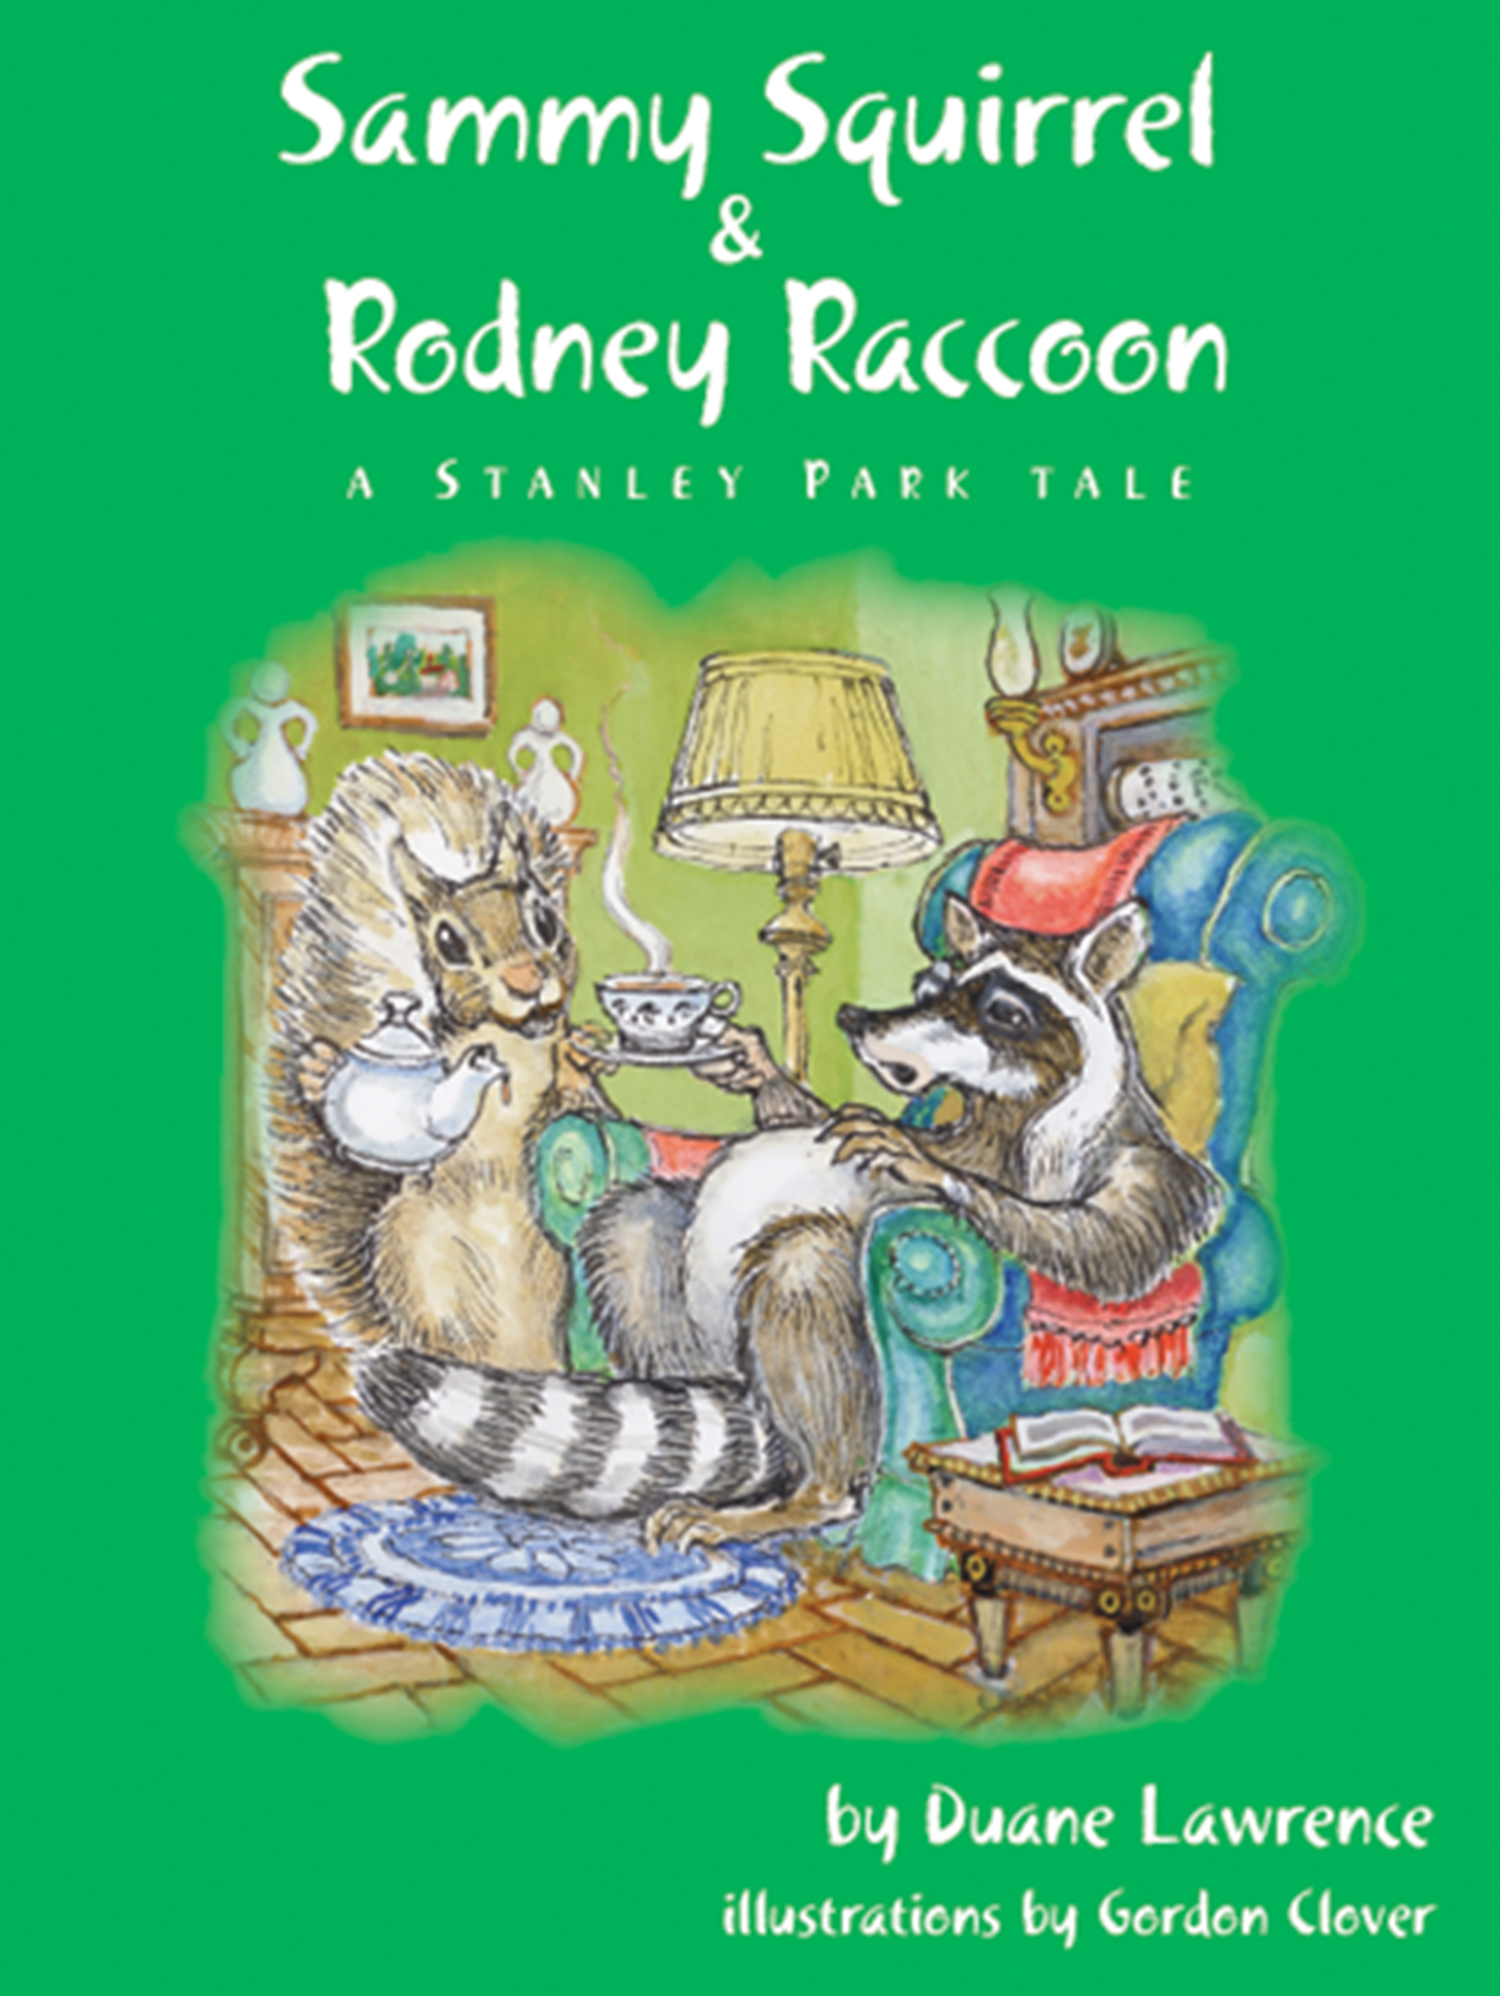 Rodney Raccoon and Sammy Squirrel Book Cover